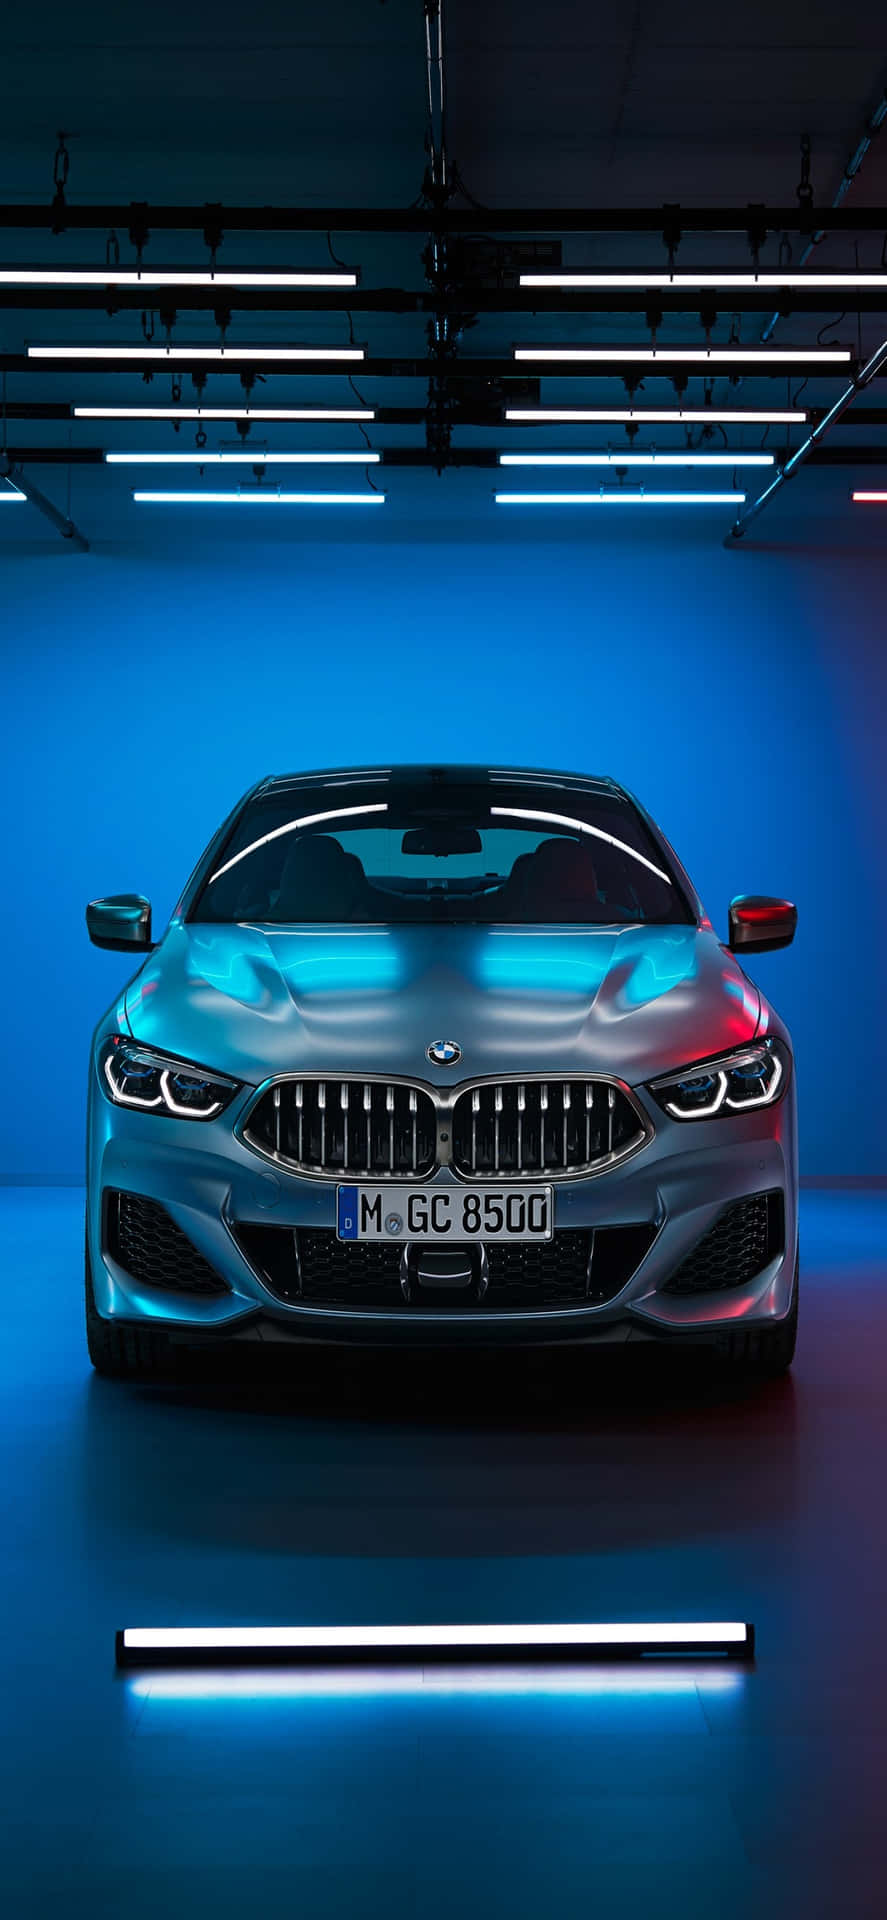 Enjoy the luxury of the Iphone X with the power of a BMW